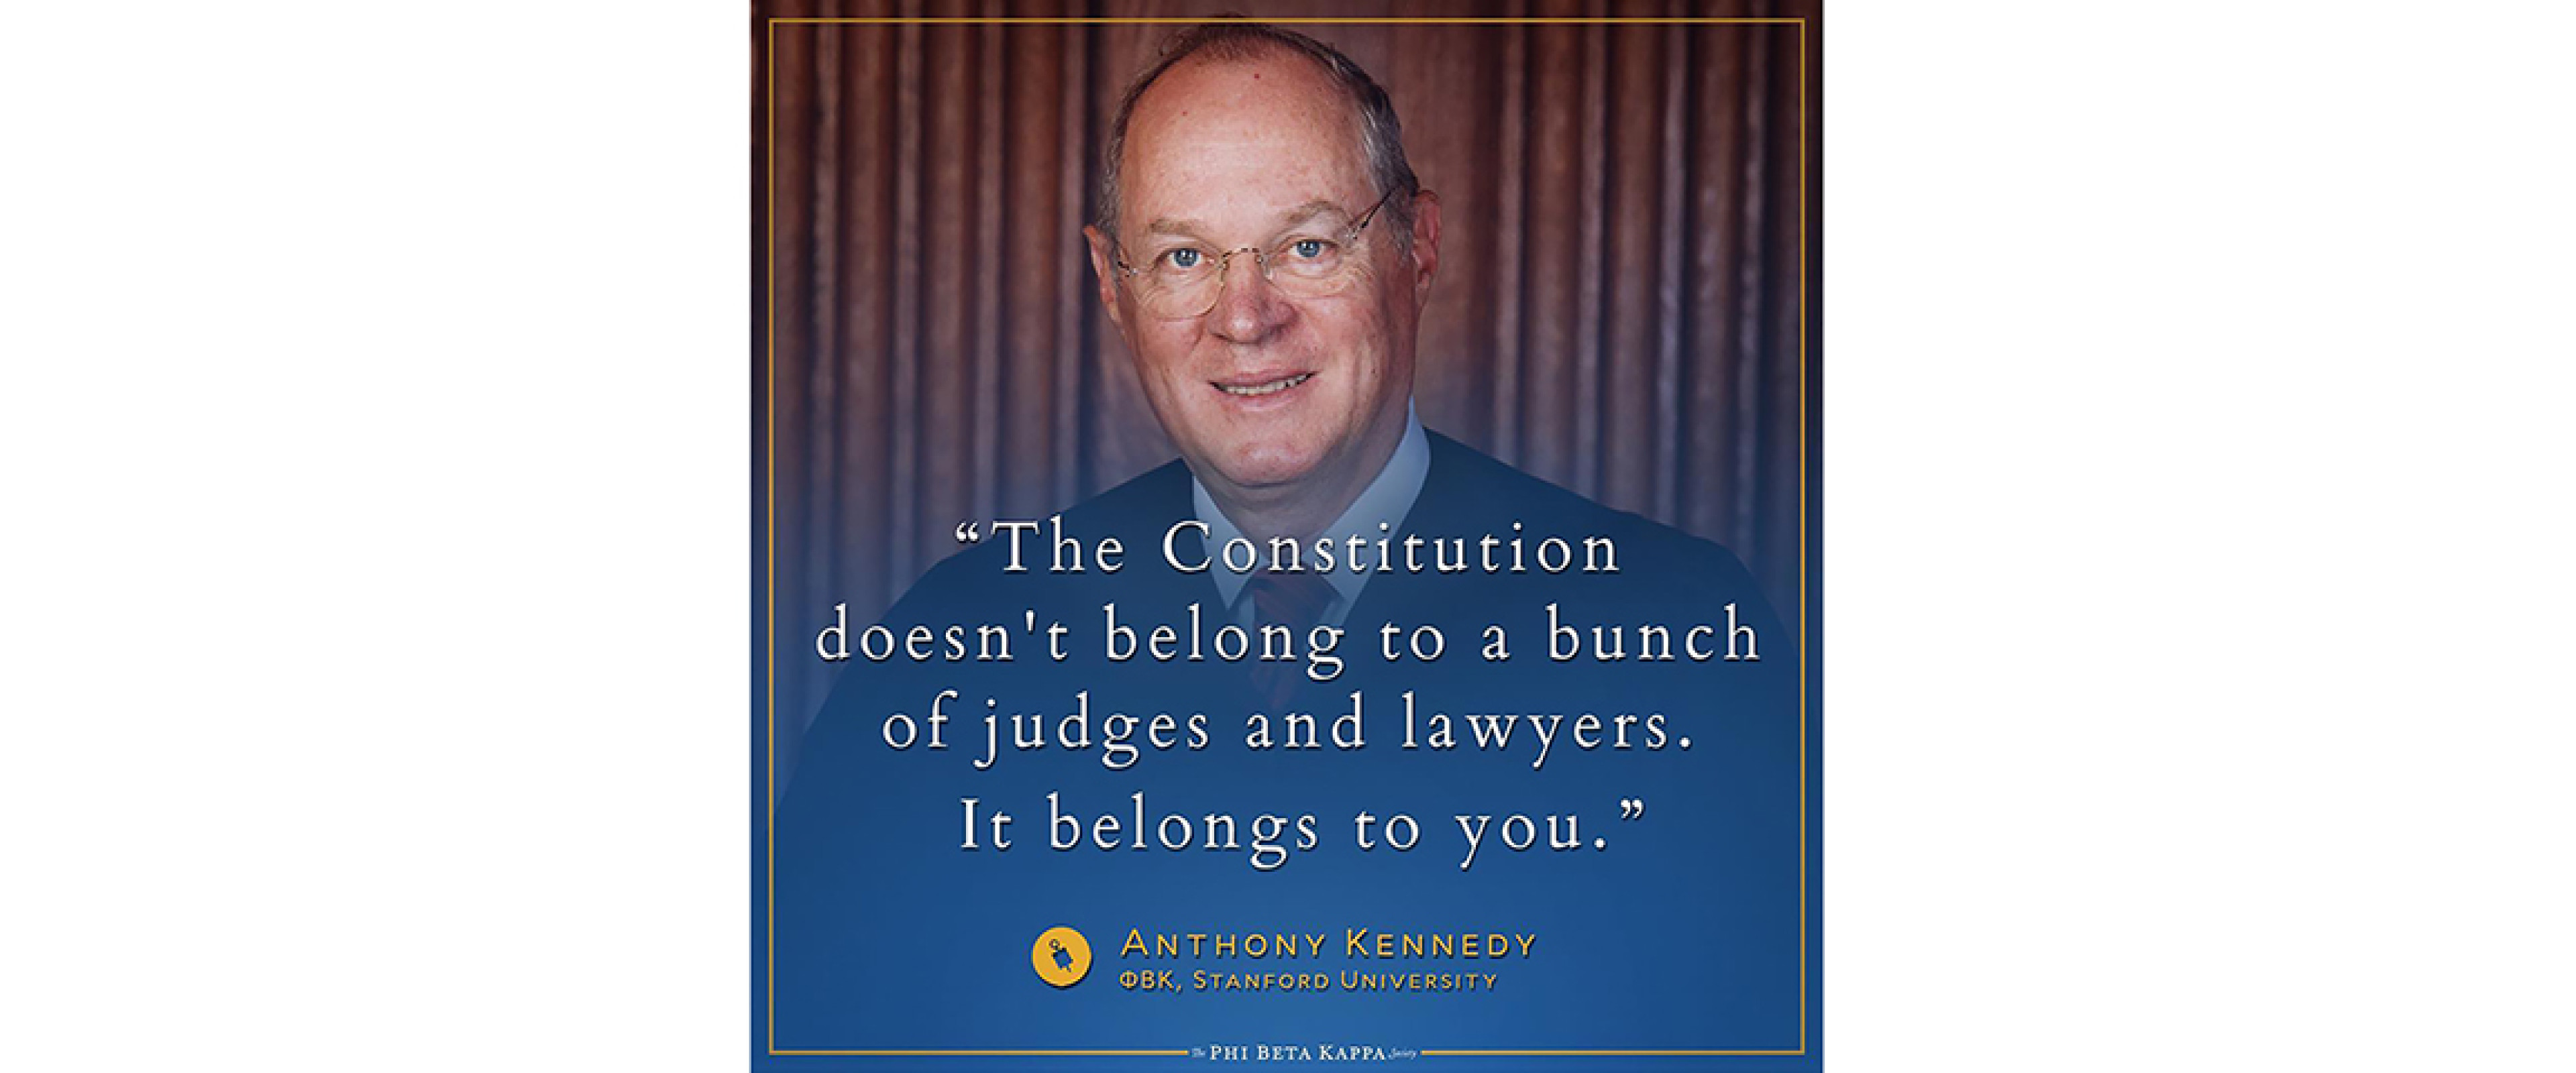 Anthony Kennedy, PBK Stanford - The Constitution doesn't belong to a bunch of judges and lawyers. It belongs to you.